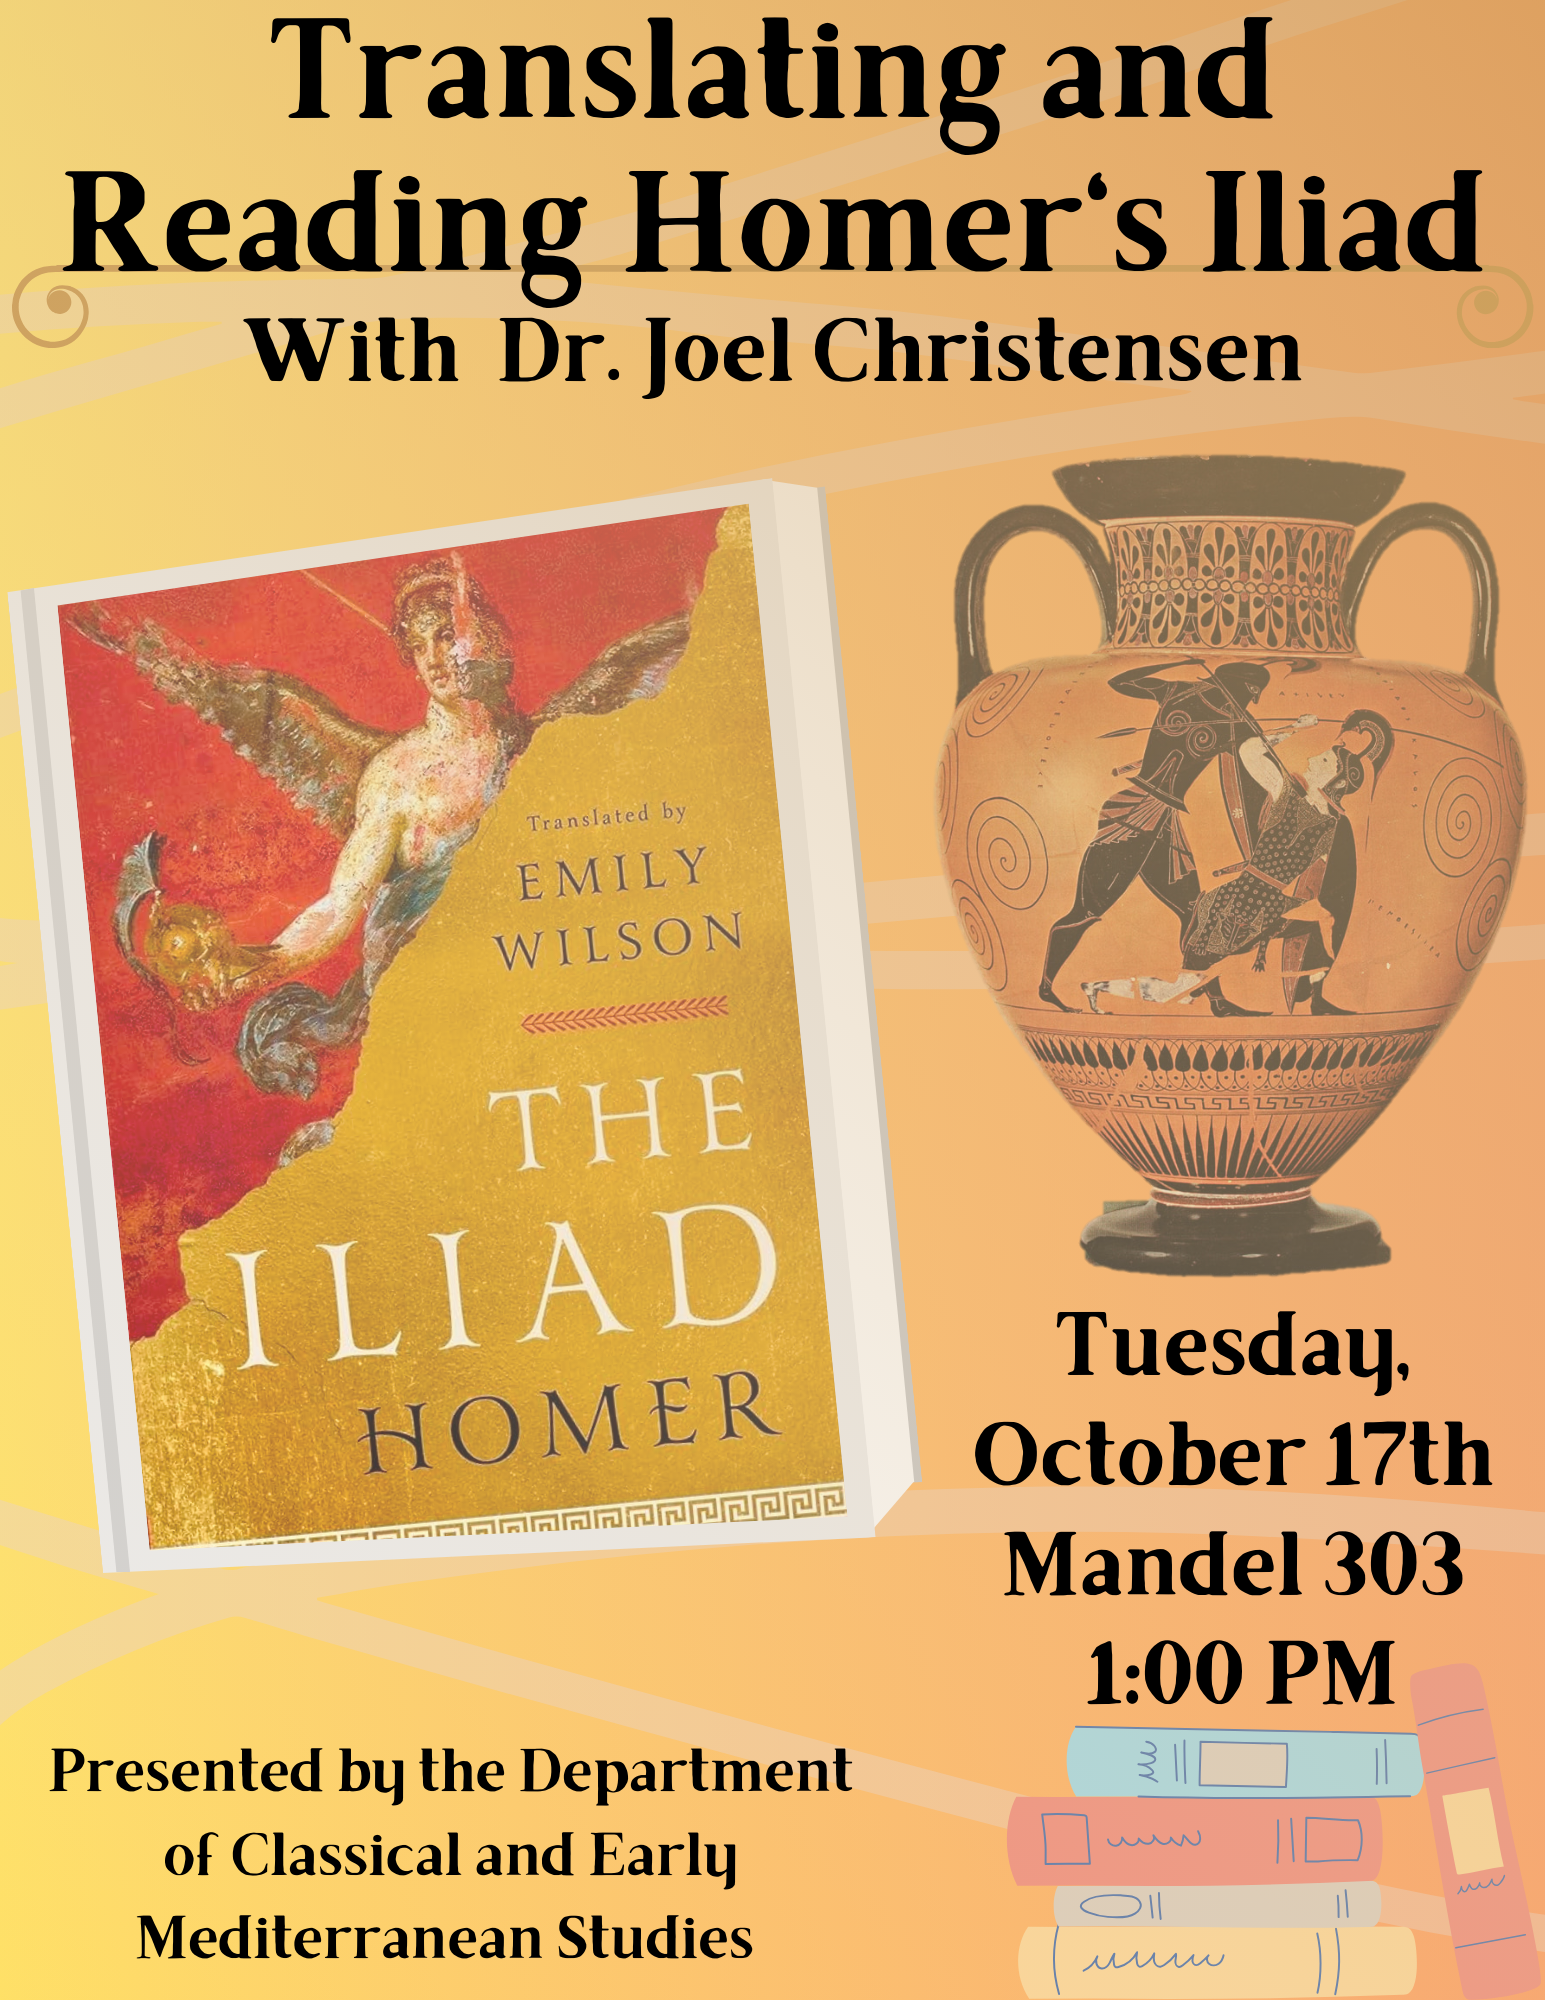 Translating and Reading Homer's Iliad. With  Dr. Joel Christensen. On Tuesday, October 17th. At 1:30PM in Mandel 303.